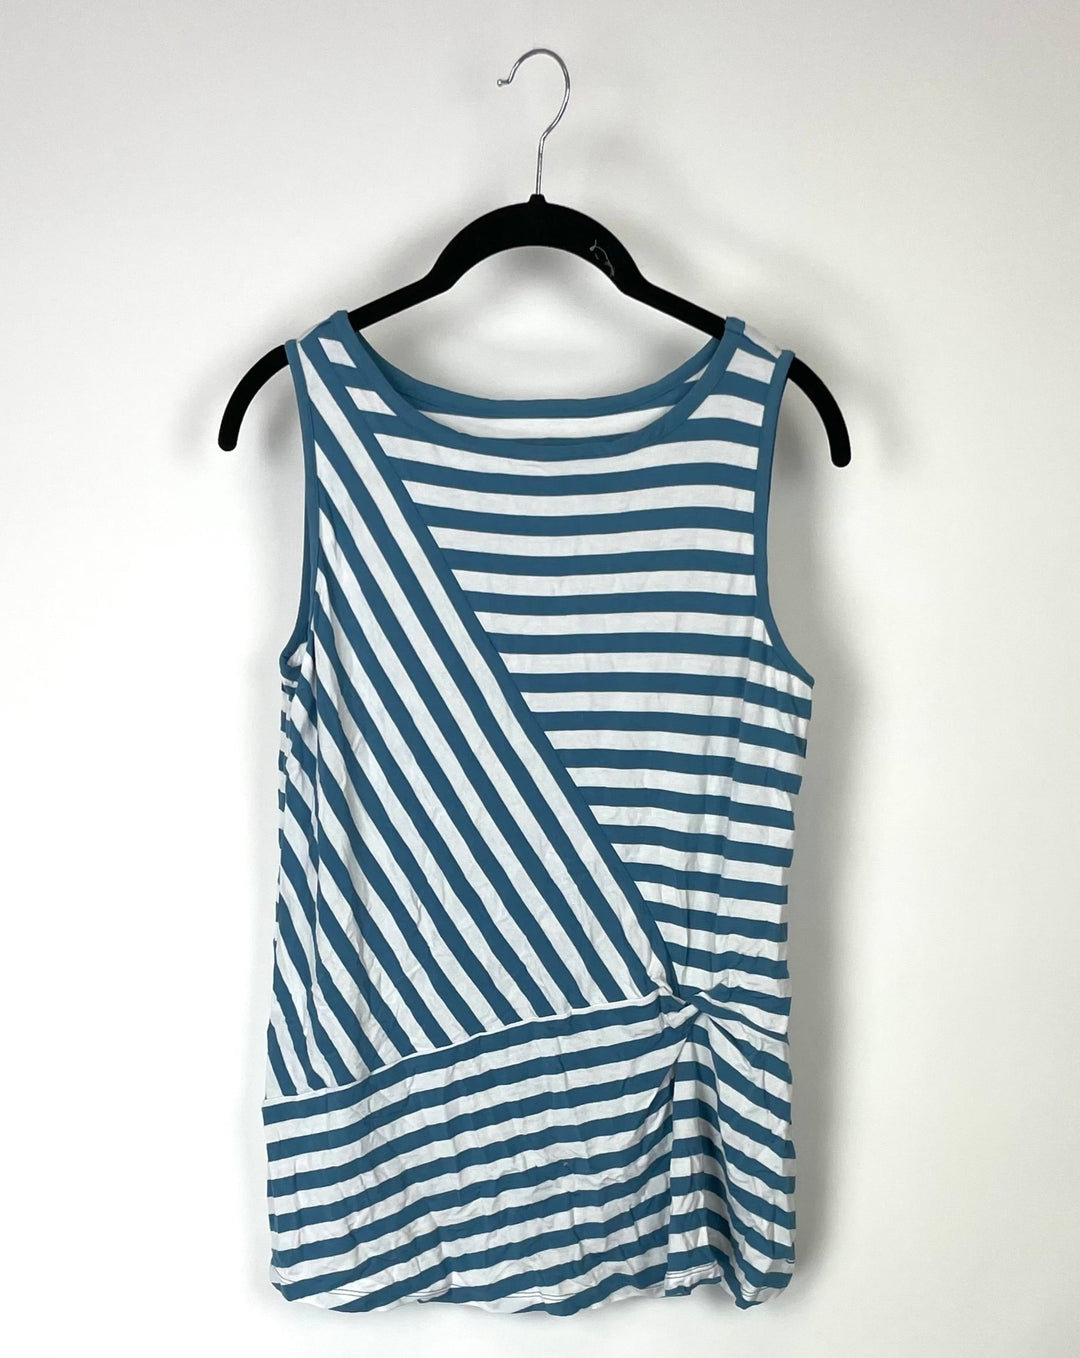 Blue and White Striped Tank Top - Small